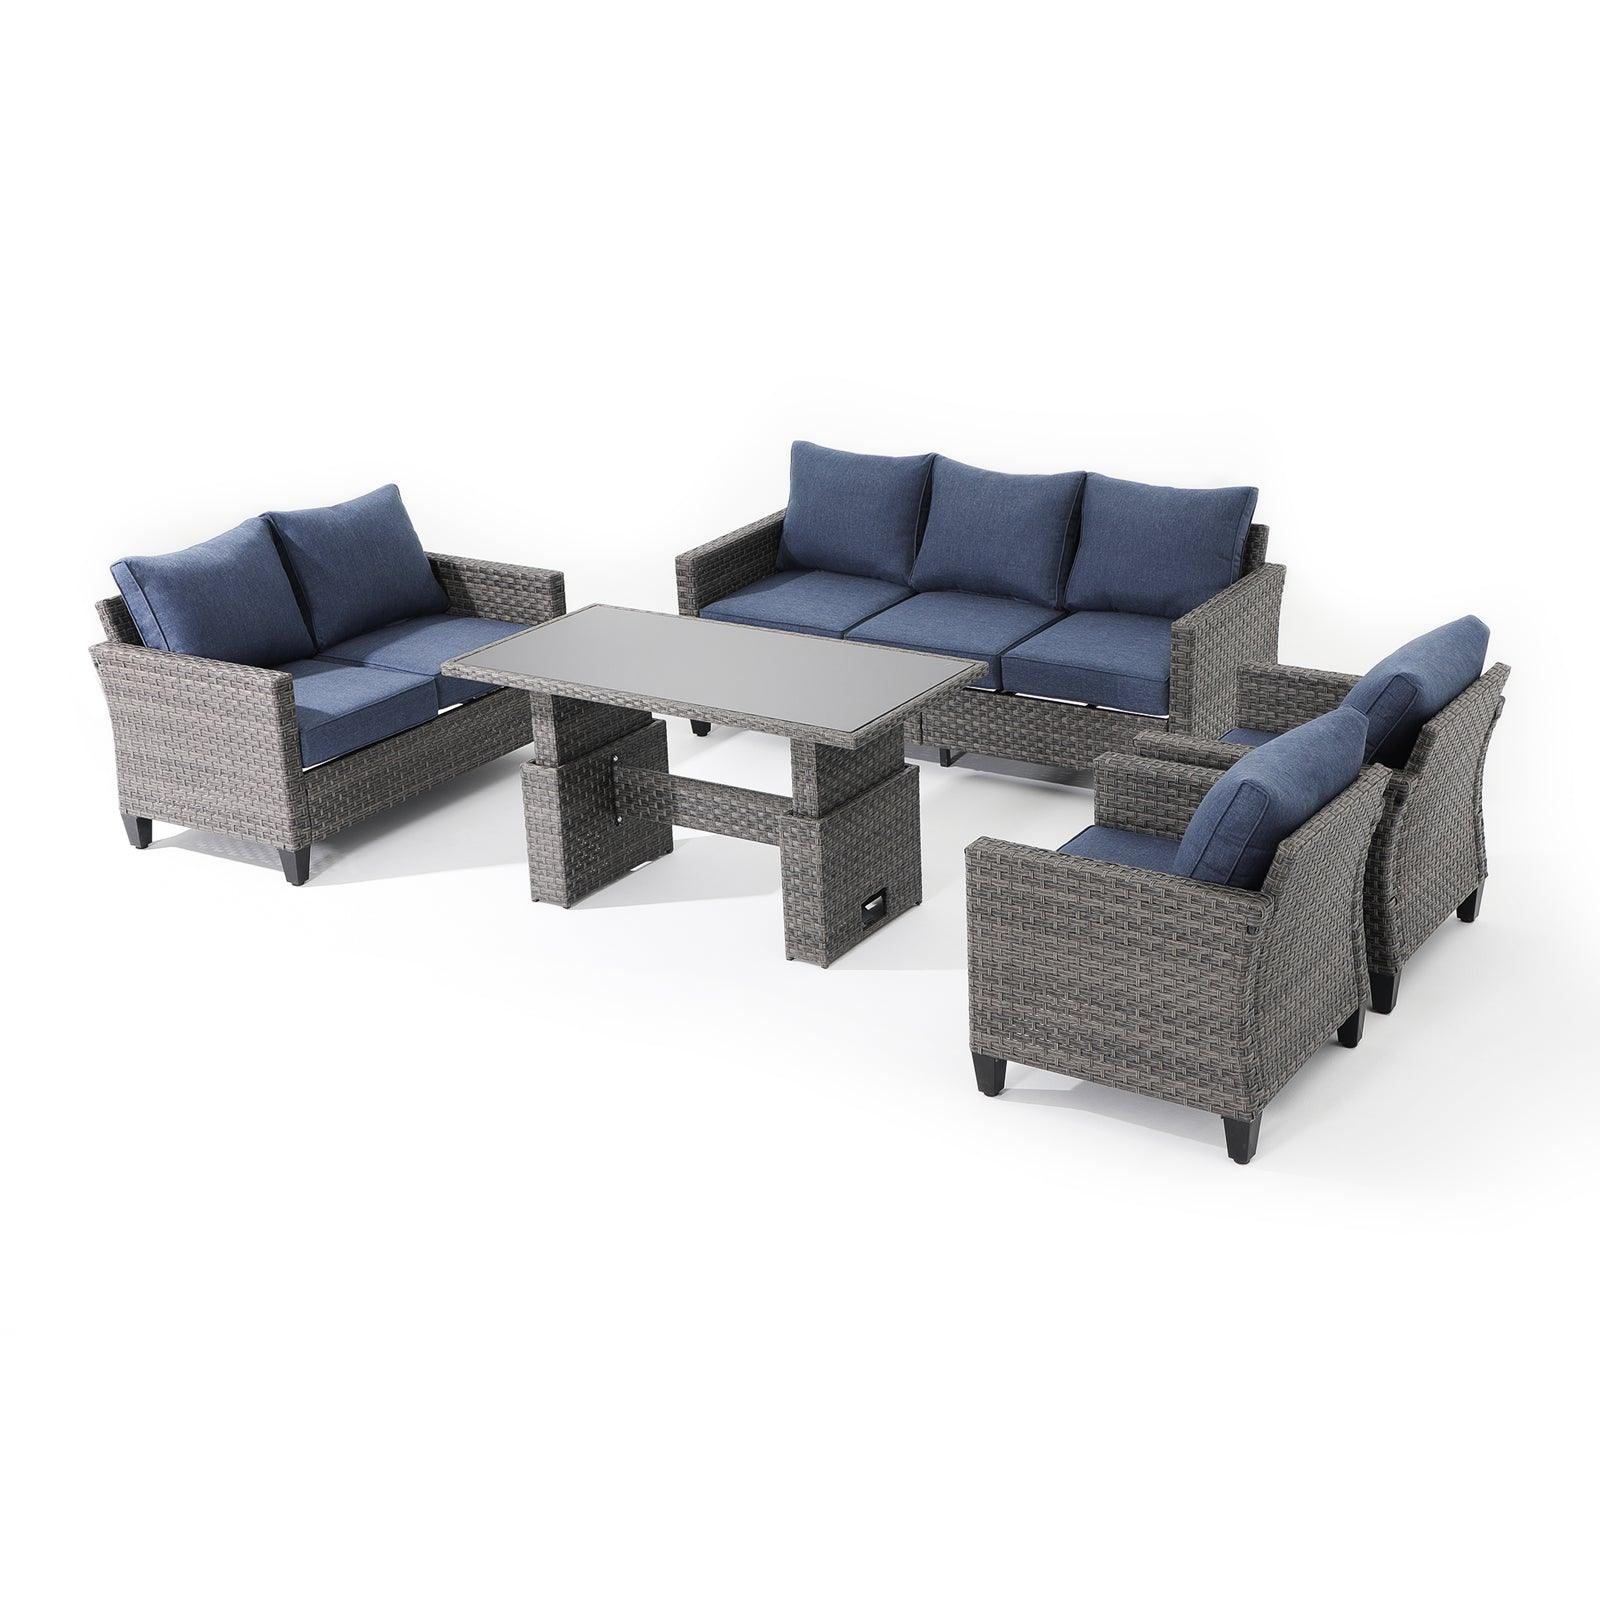 Ayia 5-Piece outdoor Sofa Set with Rattan design, Navy Blue cushions, a 3-seater sofa, 2 arm chairs , 1 loveseat, 1 multifunctional outdoor table, left angle view- Jardina Furniture #color_Navy blue#piece_5-pc. with table